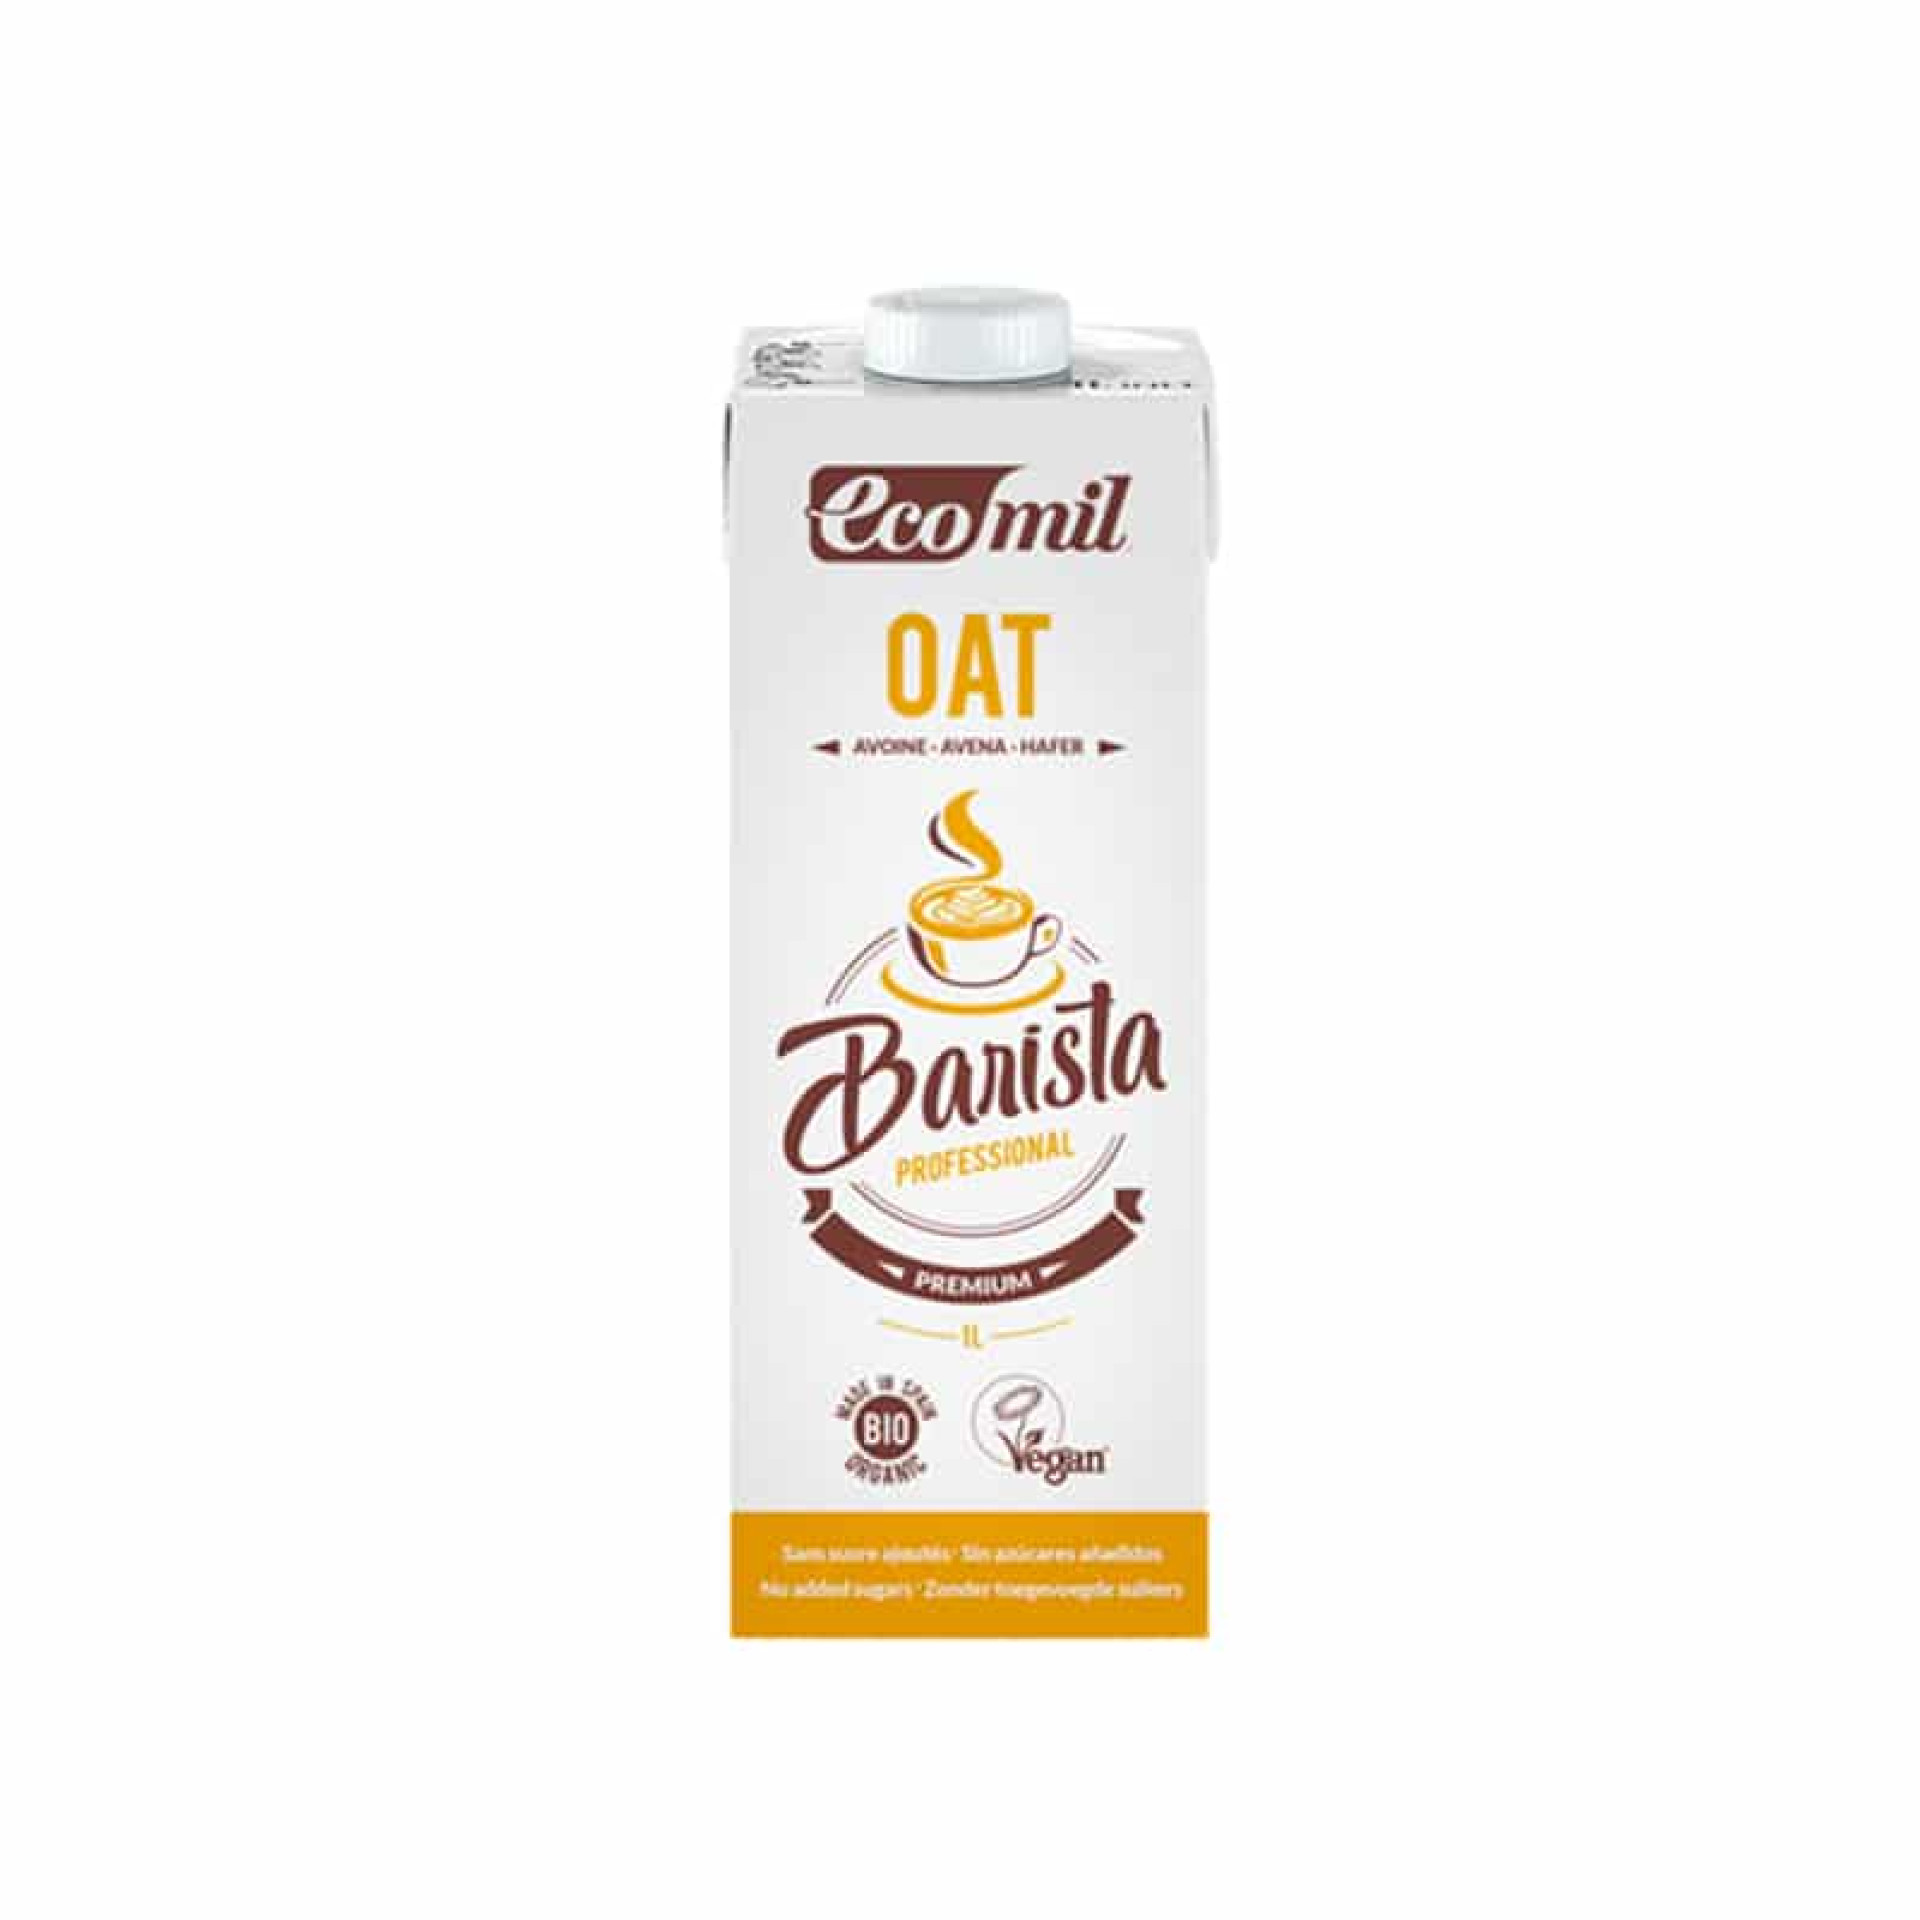 Ecomil - OAT haver